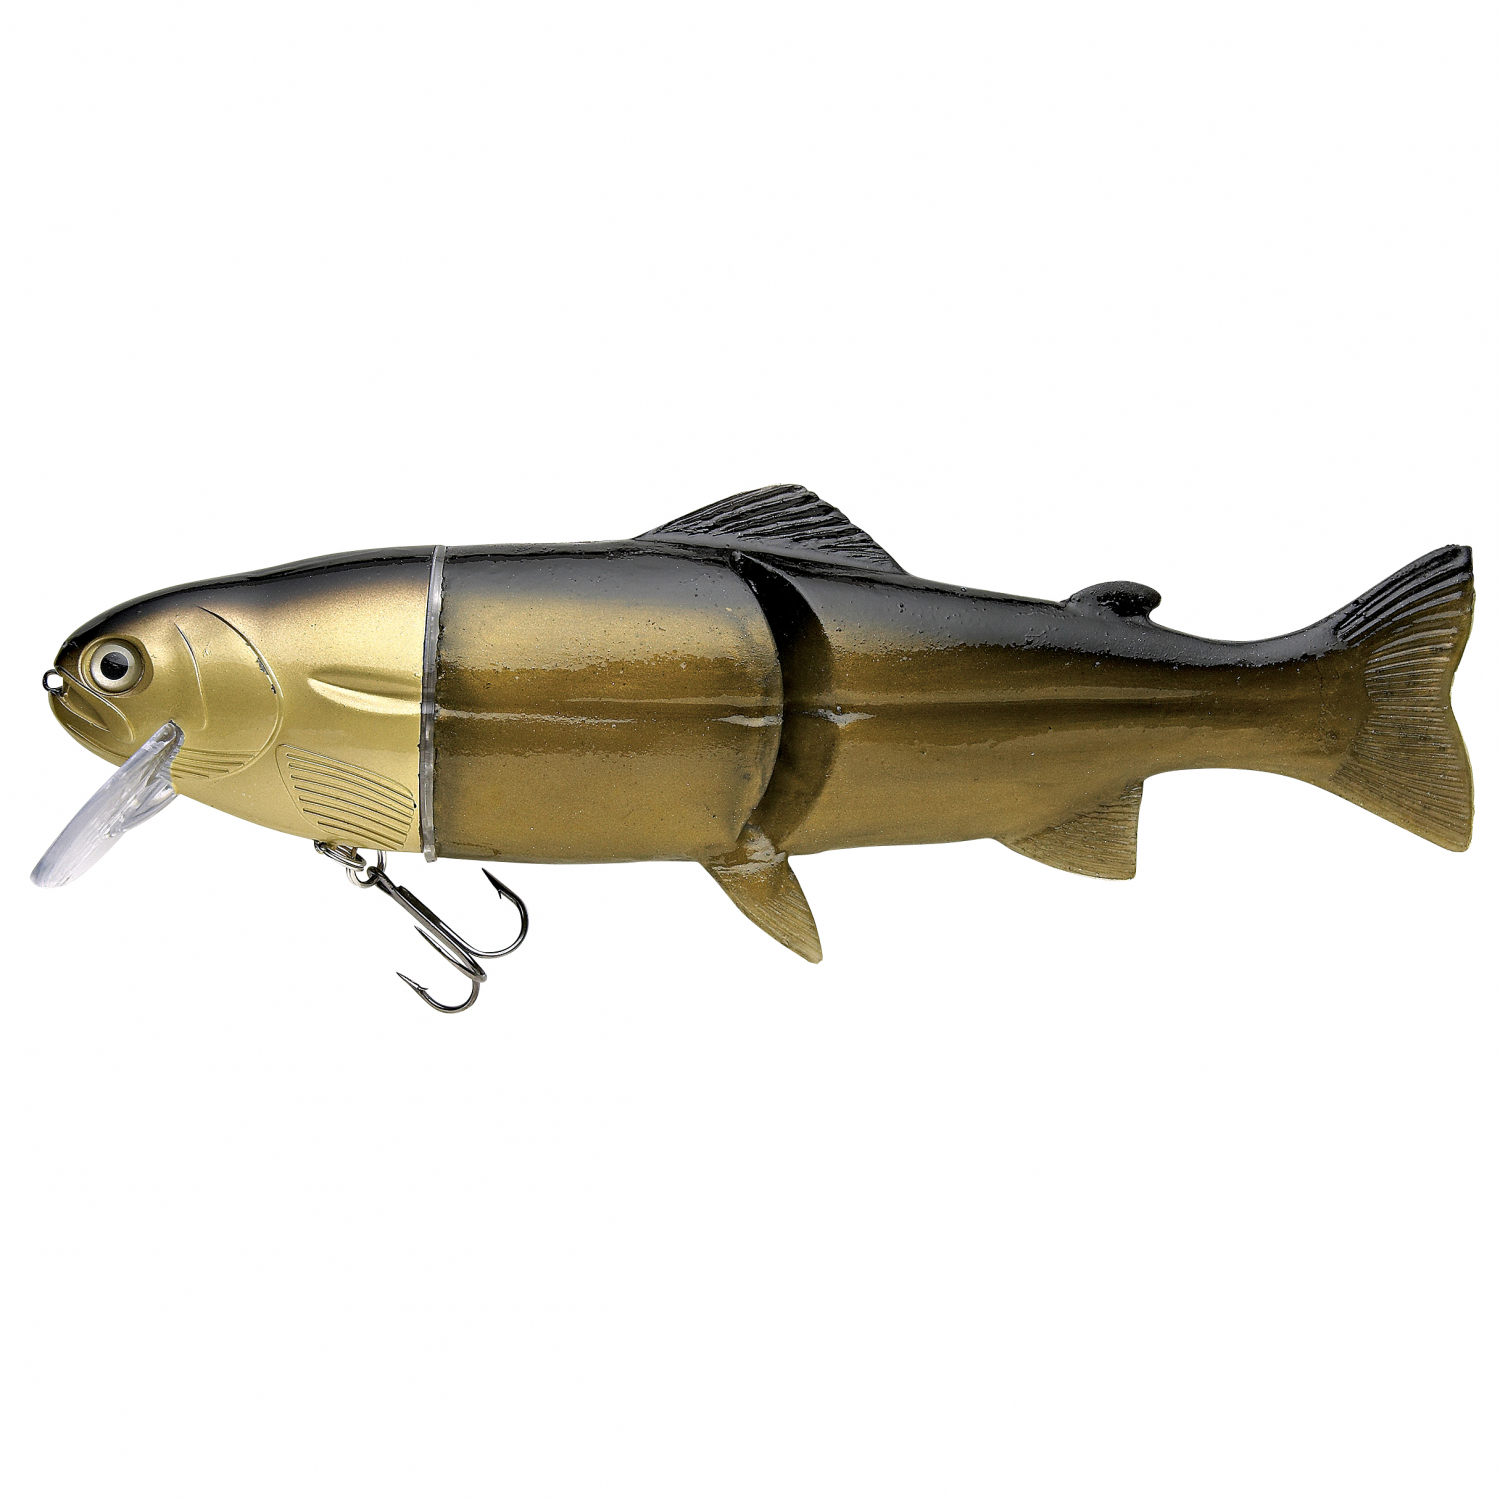 Castaic Lure Castaic Real-Baits - Golden Shiner 